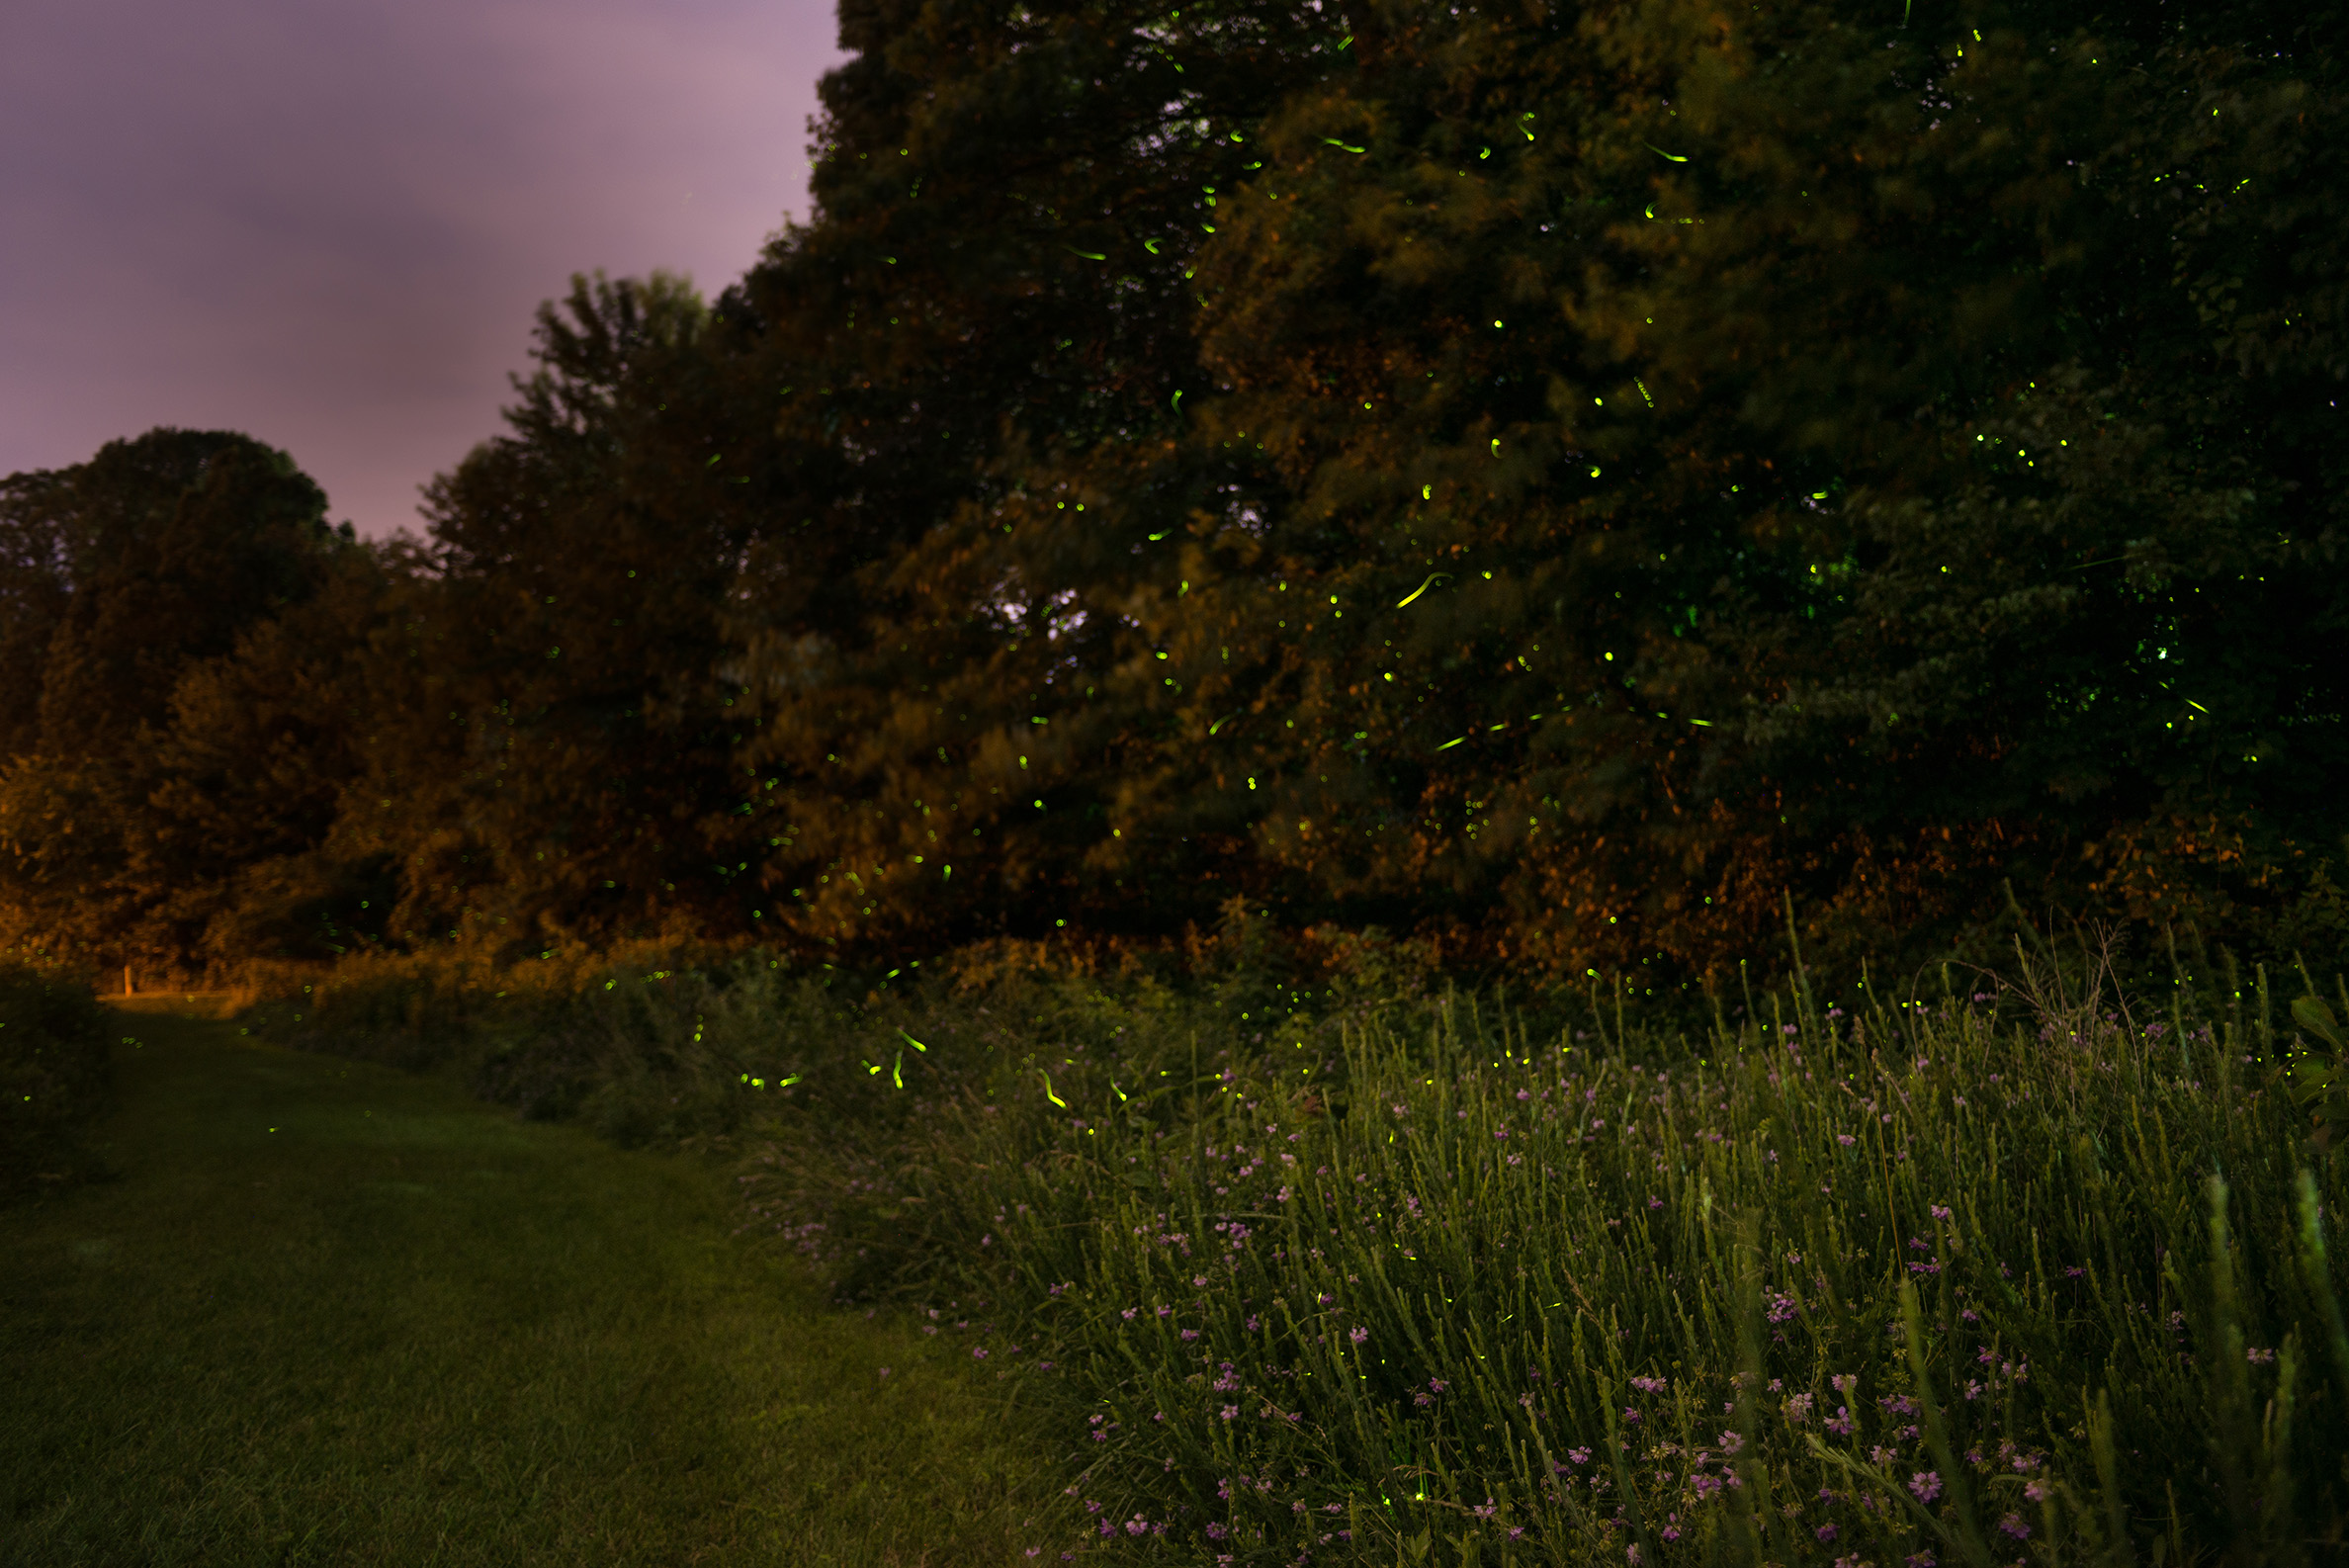 Against a backdrop of dark trees, the bright green flashes of fireflies fill the evening air.